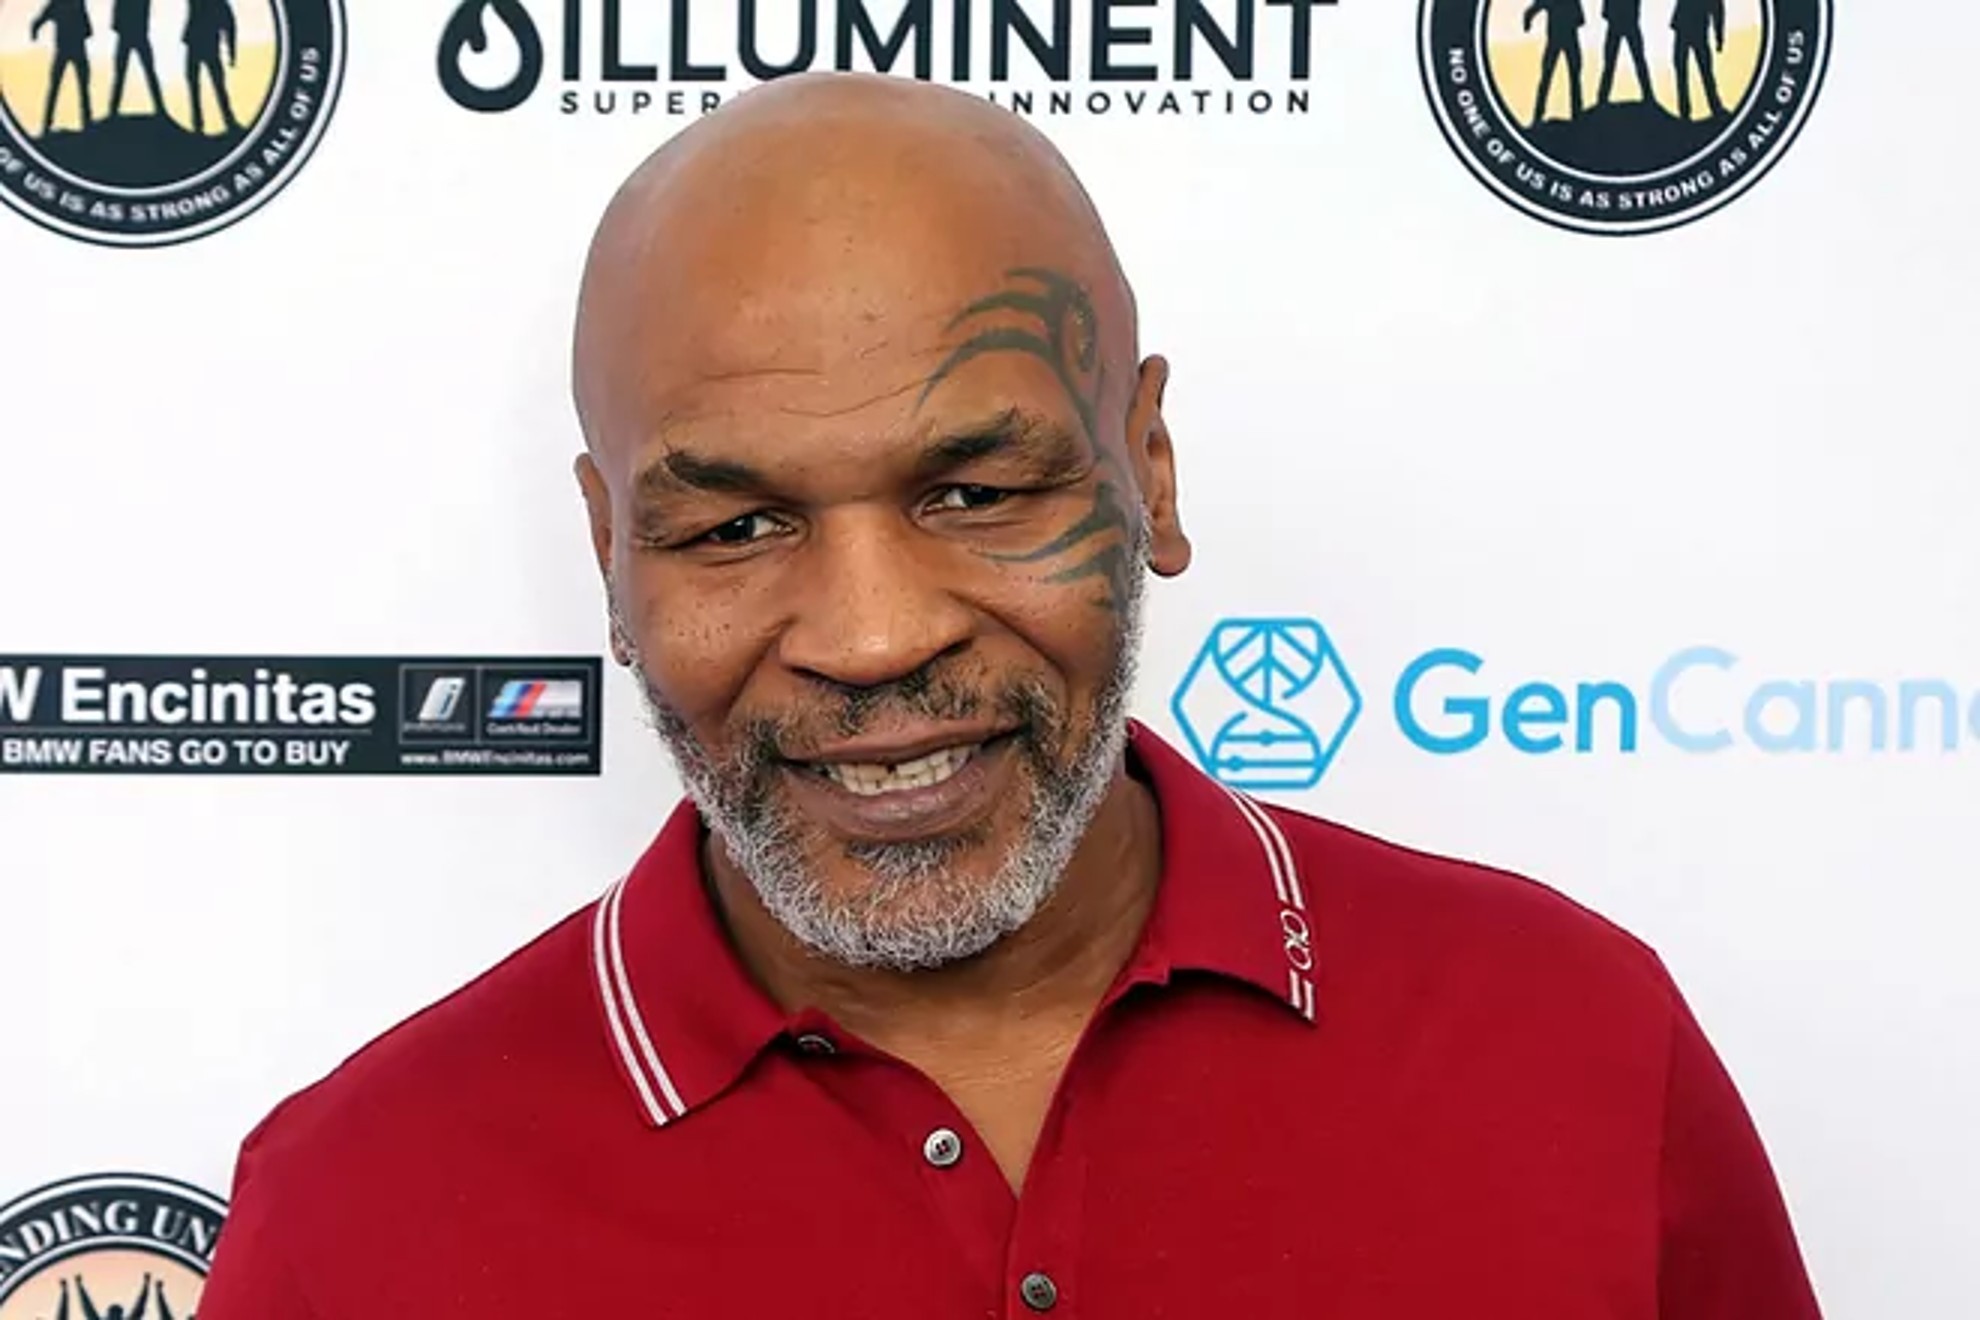 Mike Tyson's friends risk 'death wish' by giving him a surprise 'weed' cake